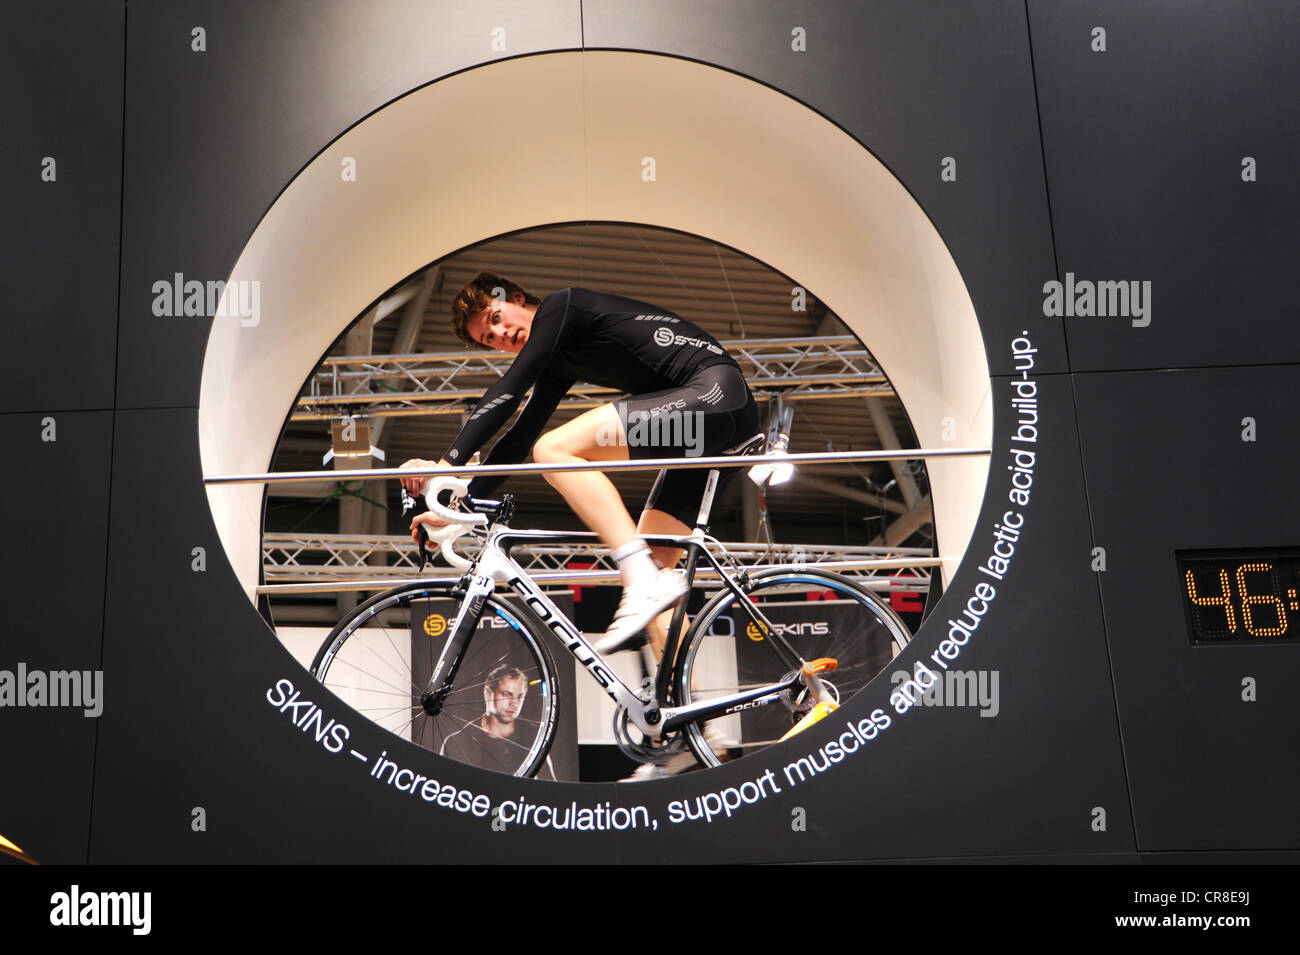 Cyclist at the exhibition booth of Skins, ISPO, International Sports Business Network, a trade fair for sports equipment and Stock Photo